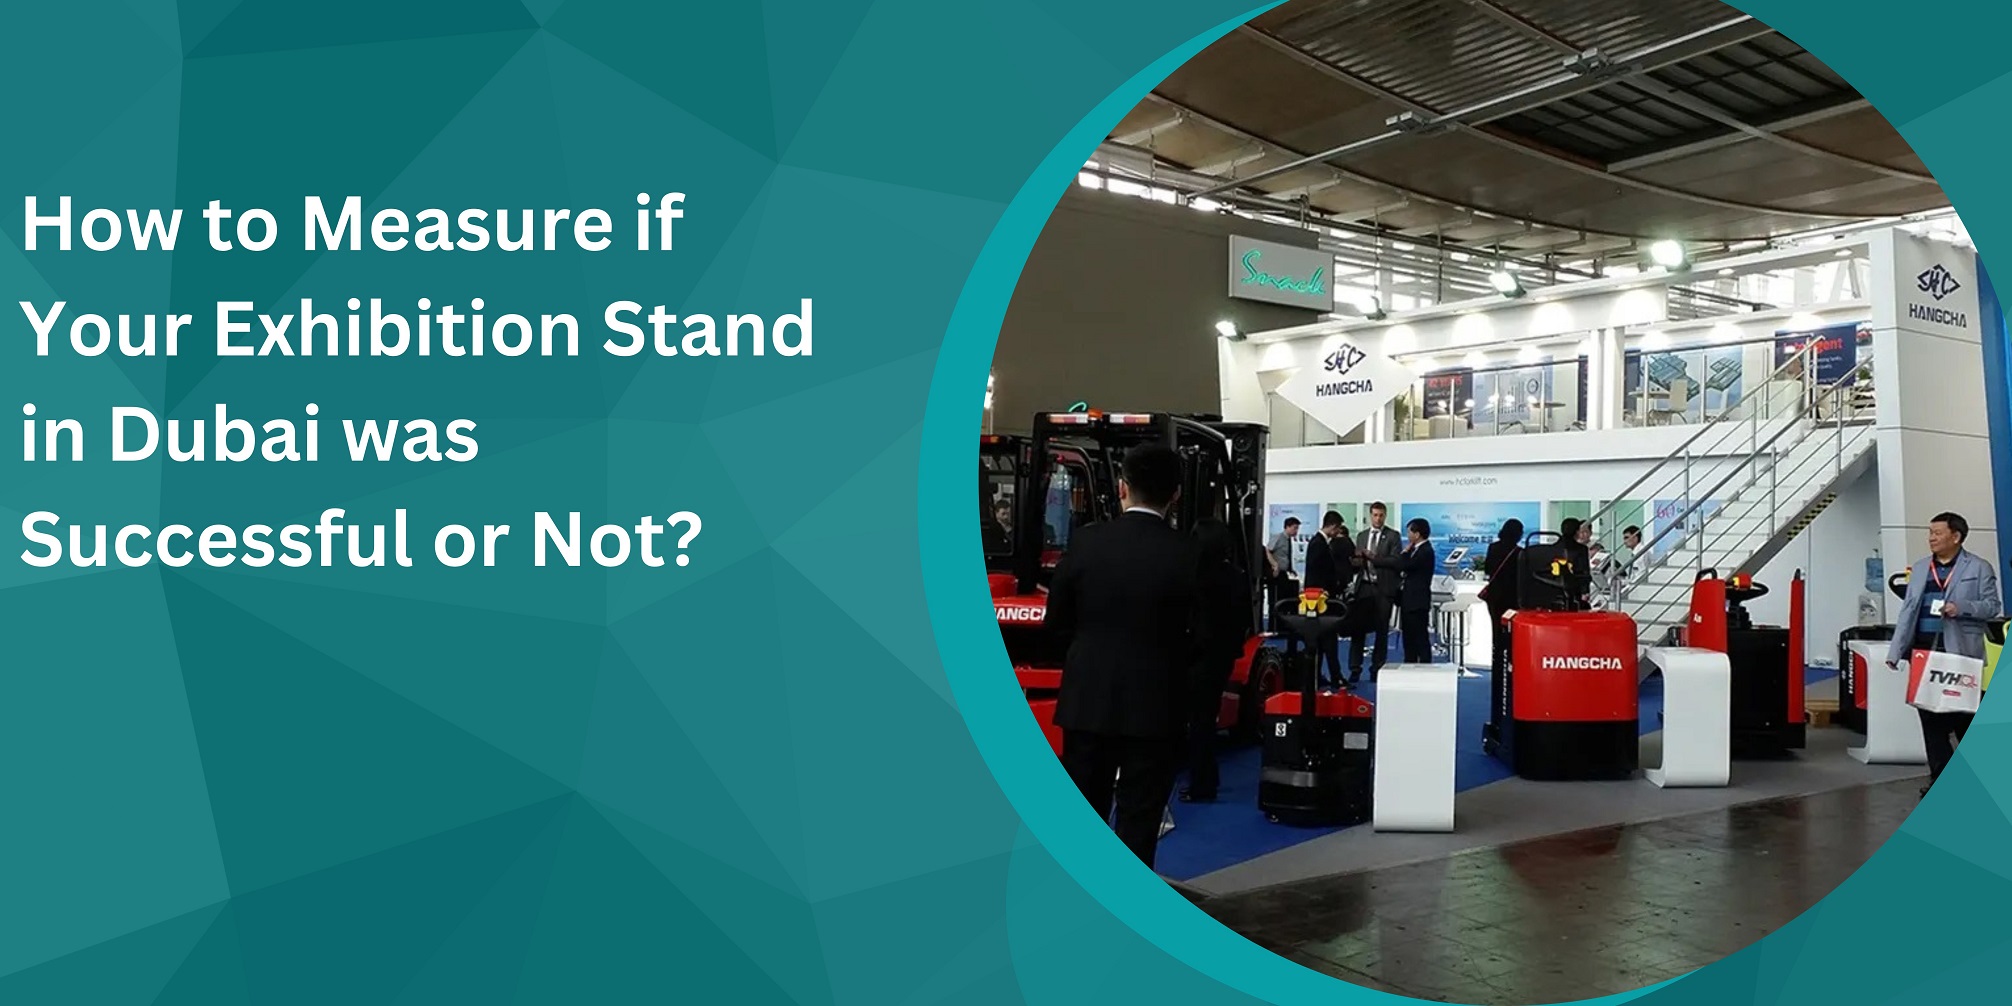 How to Measure if Your Exhibition Stand in Dubai was Successful or Not?